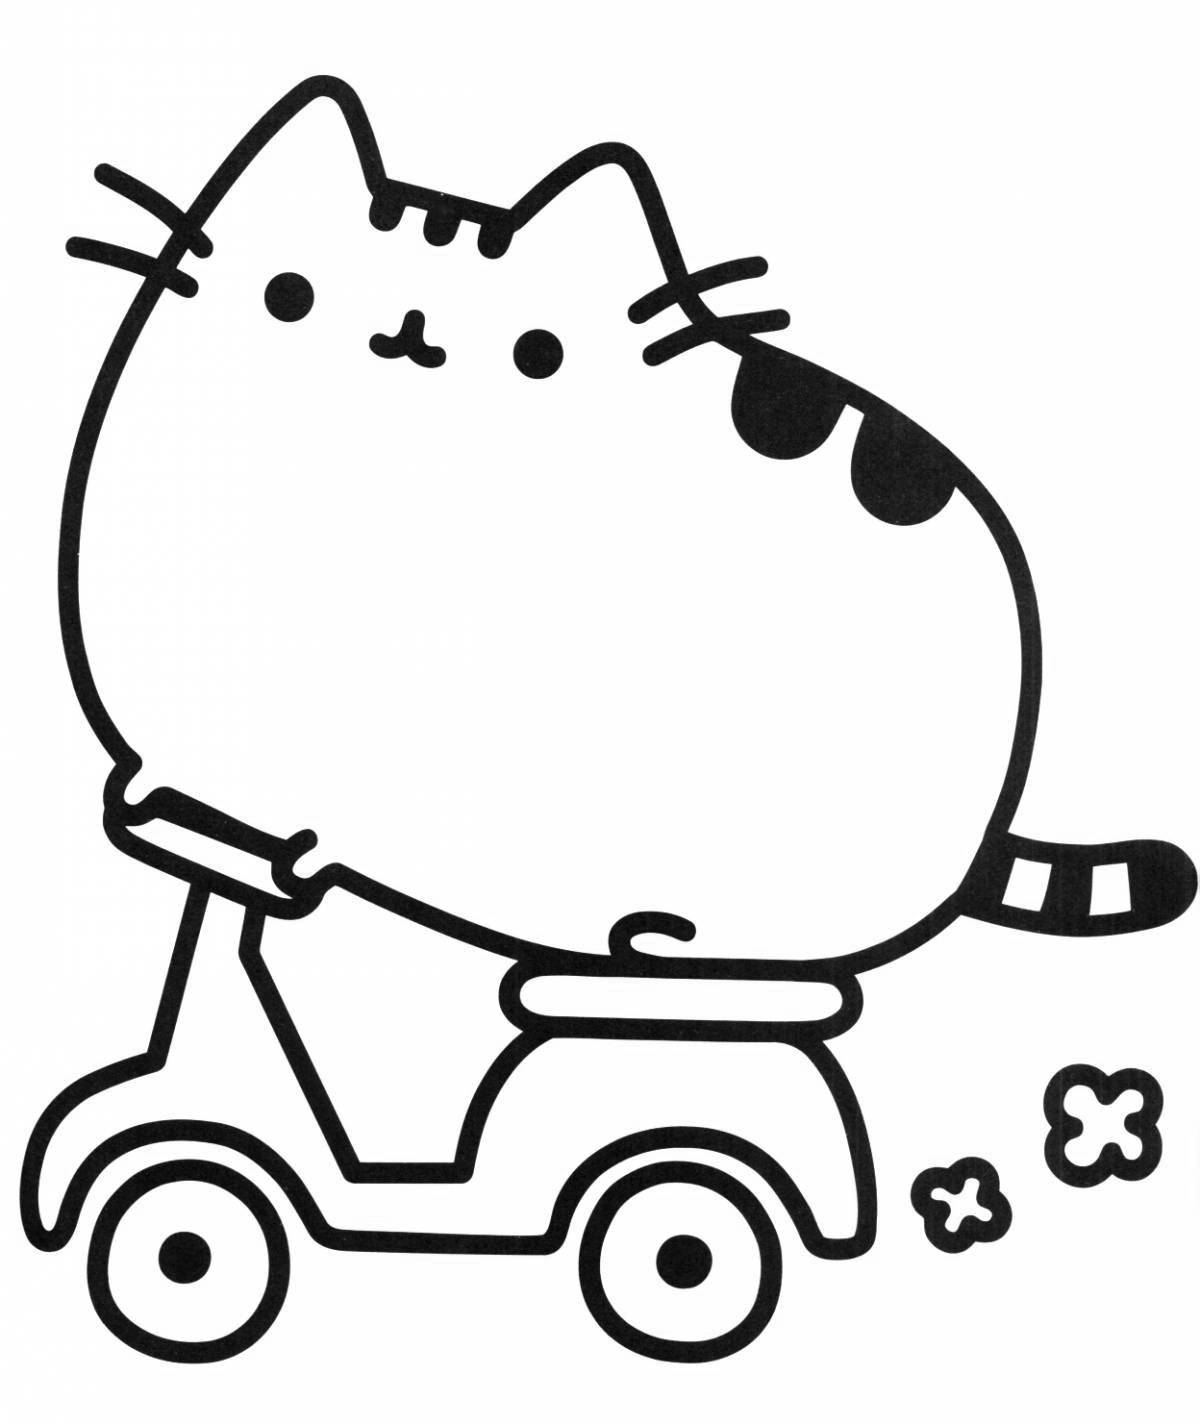 Coloring page freaky pusheen cats